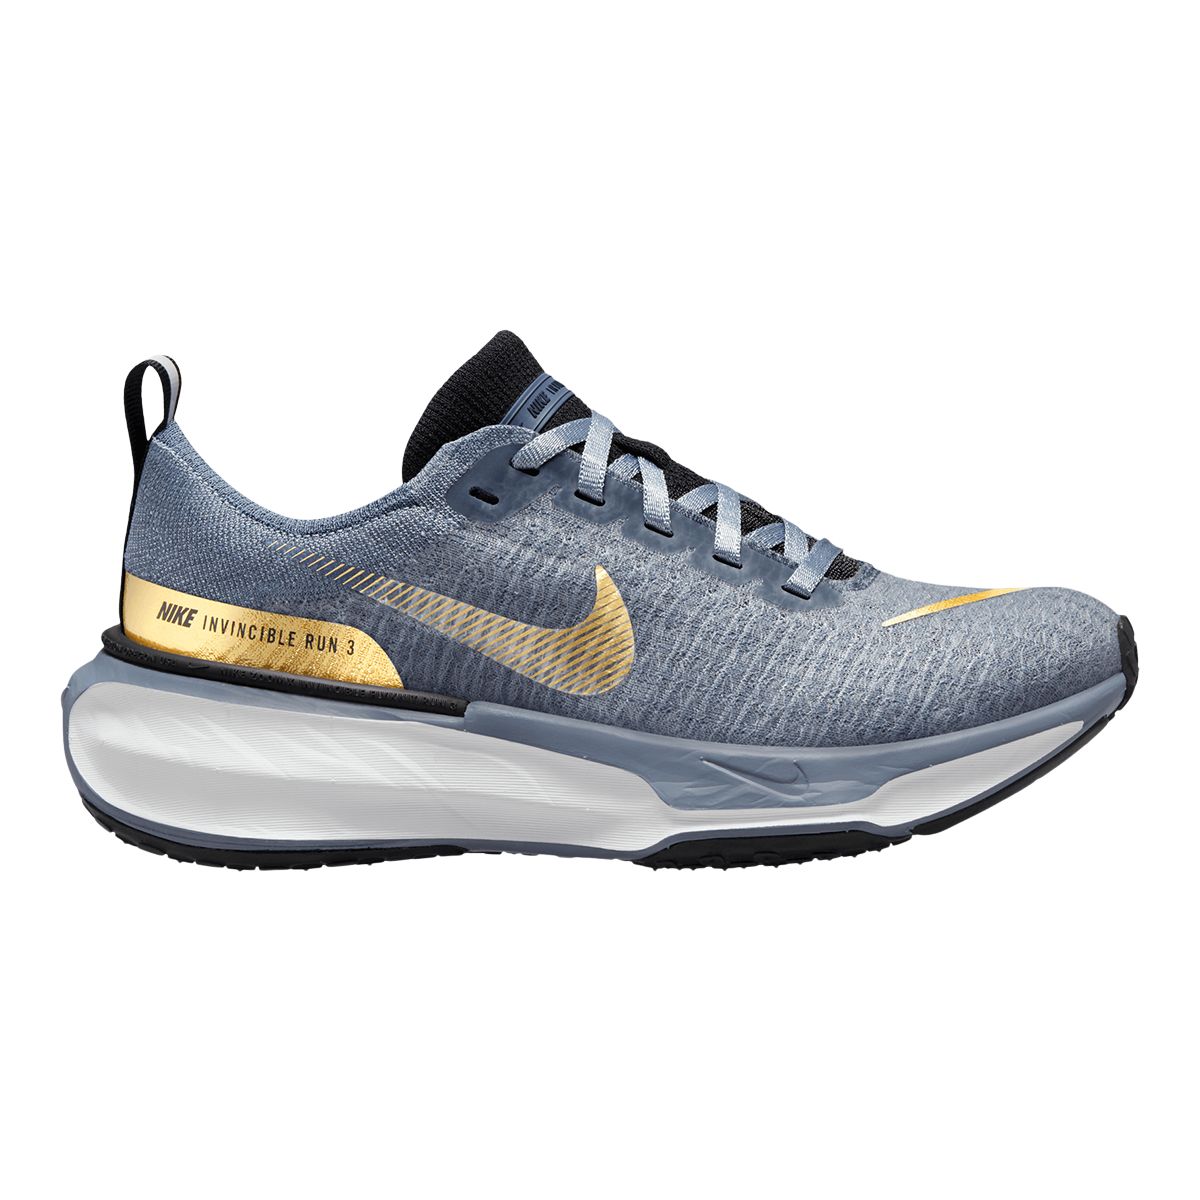 Image of Nike Women's ZoomX Invincible Run 2 Lightweight Knit Running Shoes